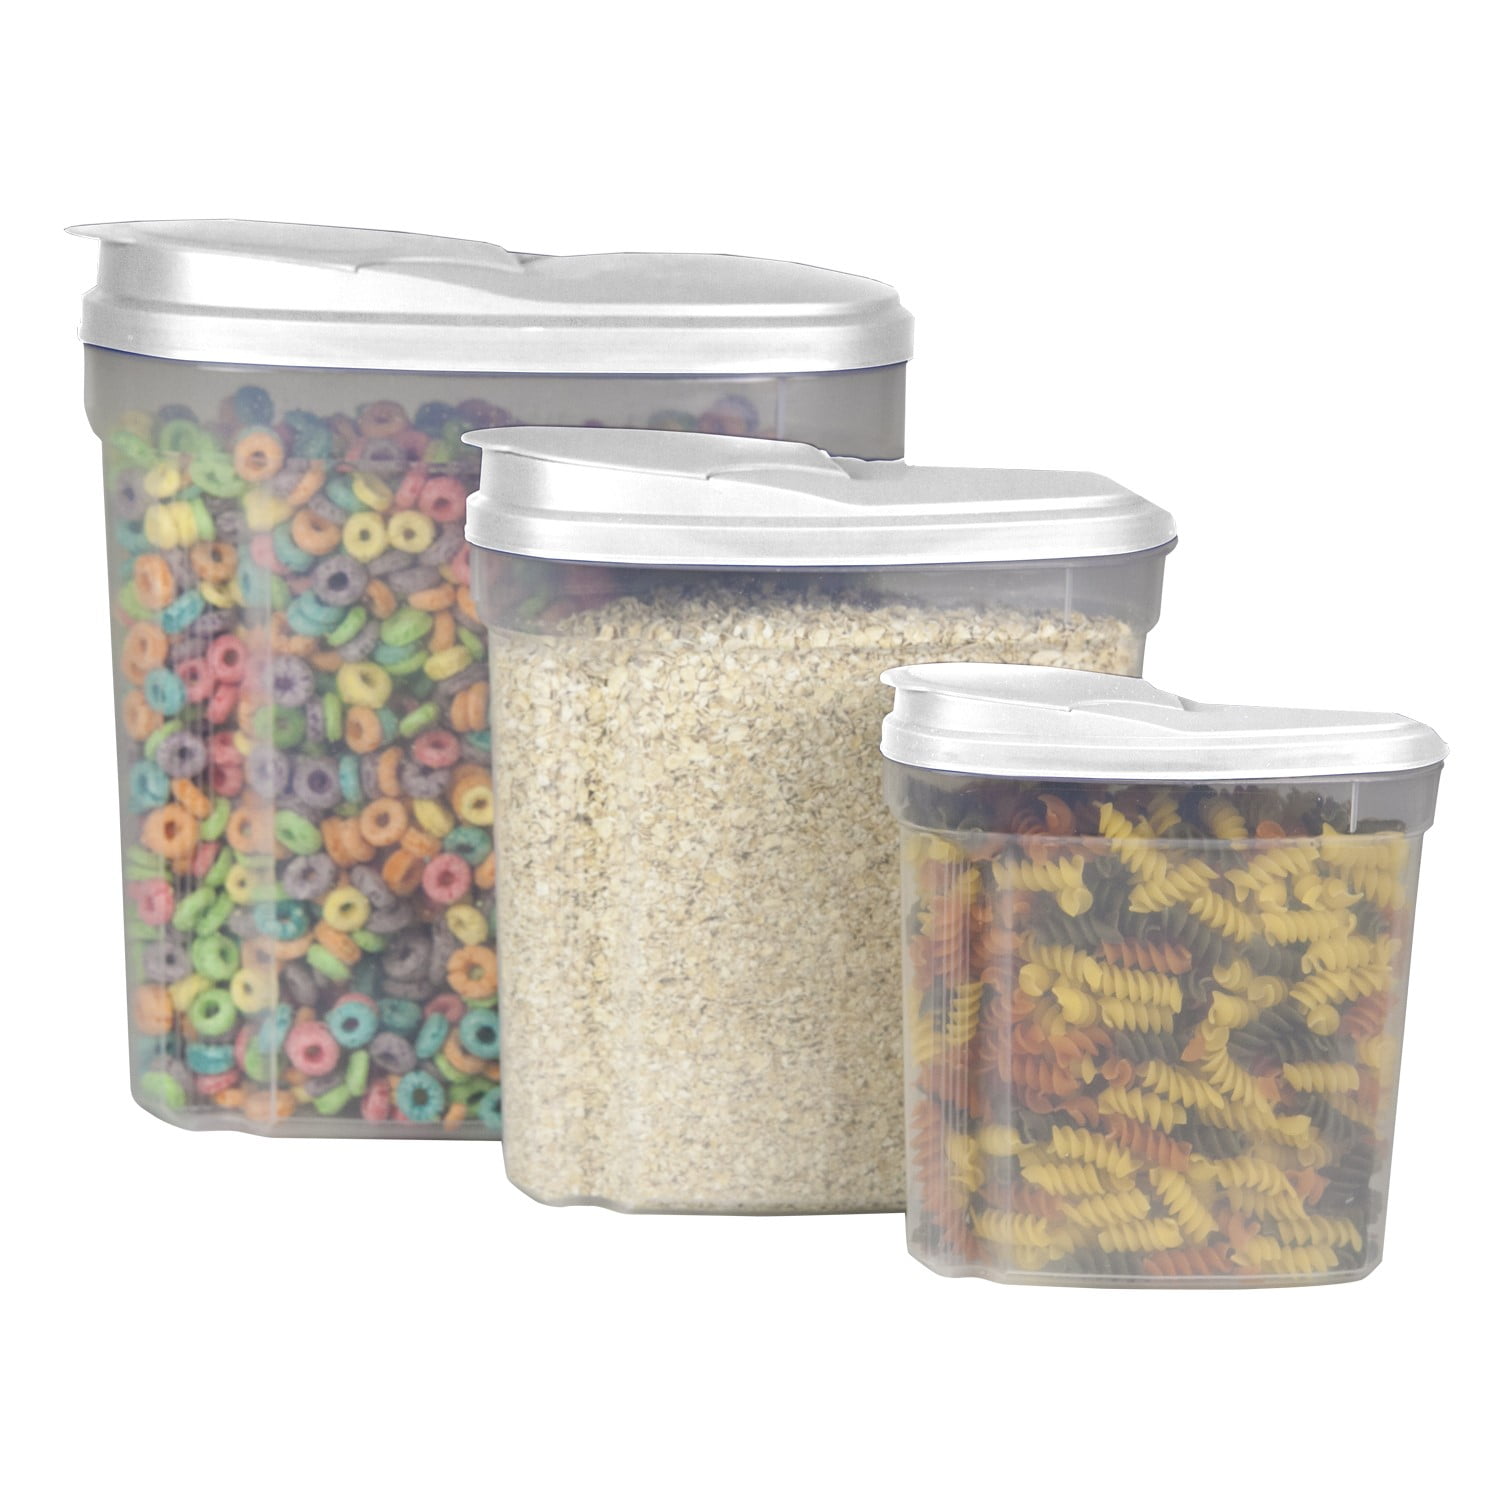 Home Basics 7 Piece Plastic Food Storage Container Set with Multi-Colored Lids